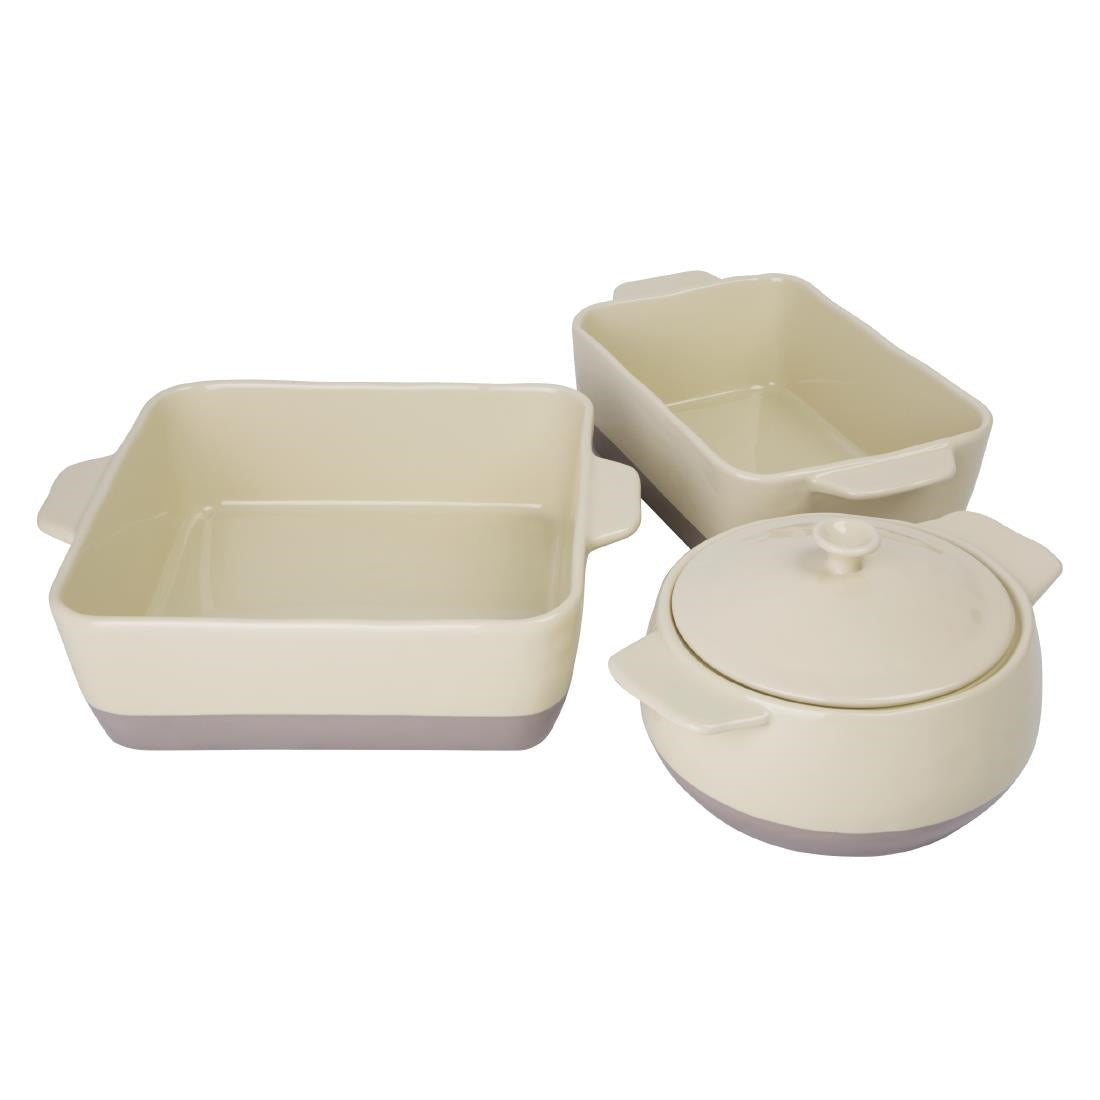 DB520 Olympia Cream And Taupe Ceramic Roasting Dish 2.5Ltr JD Catering Equipment Solutions Ltd